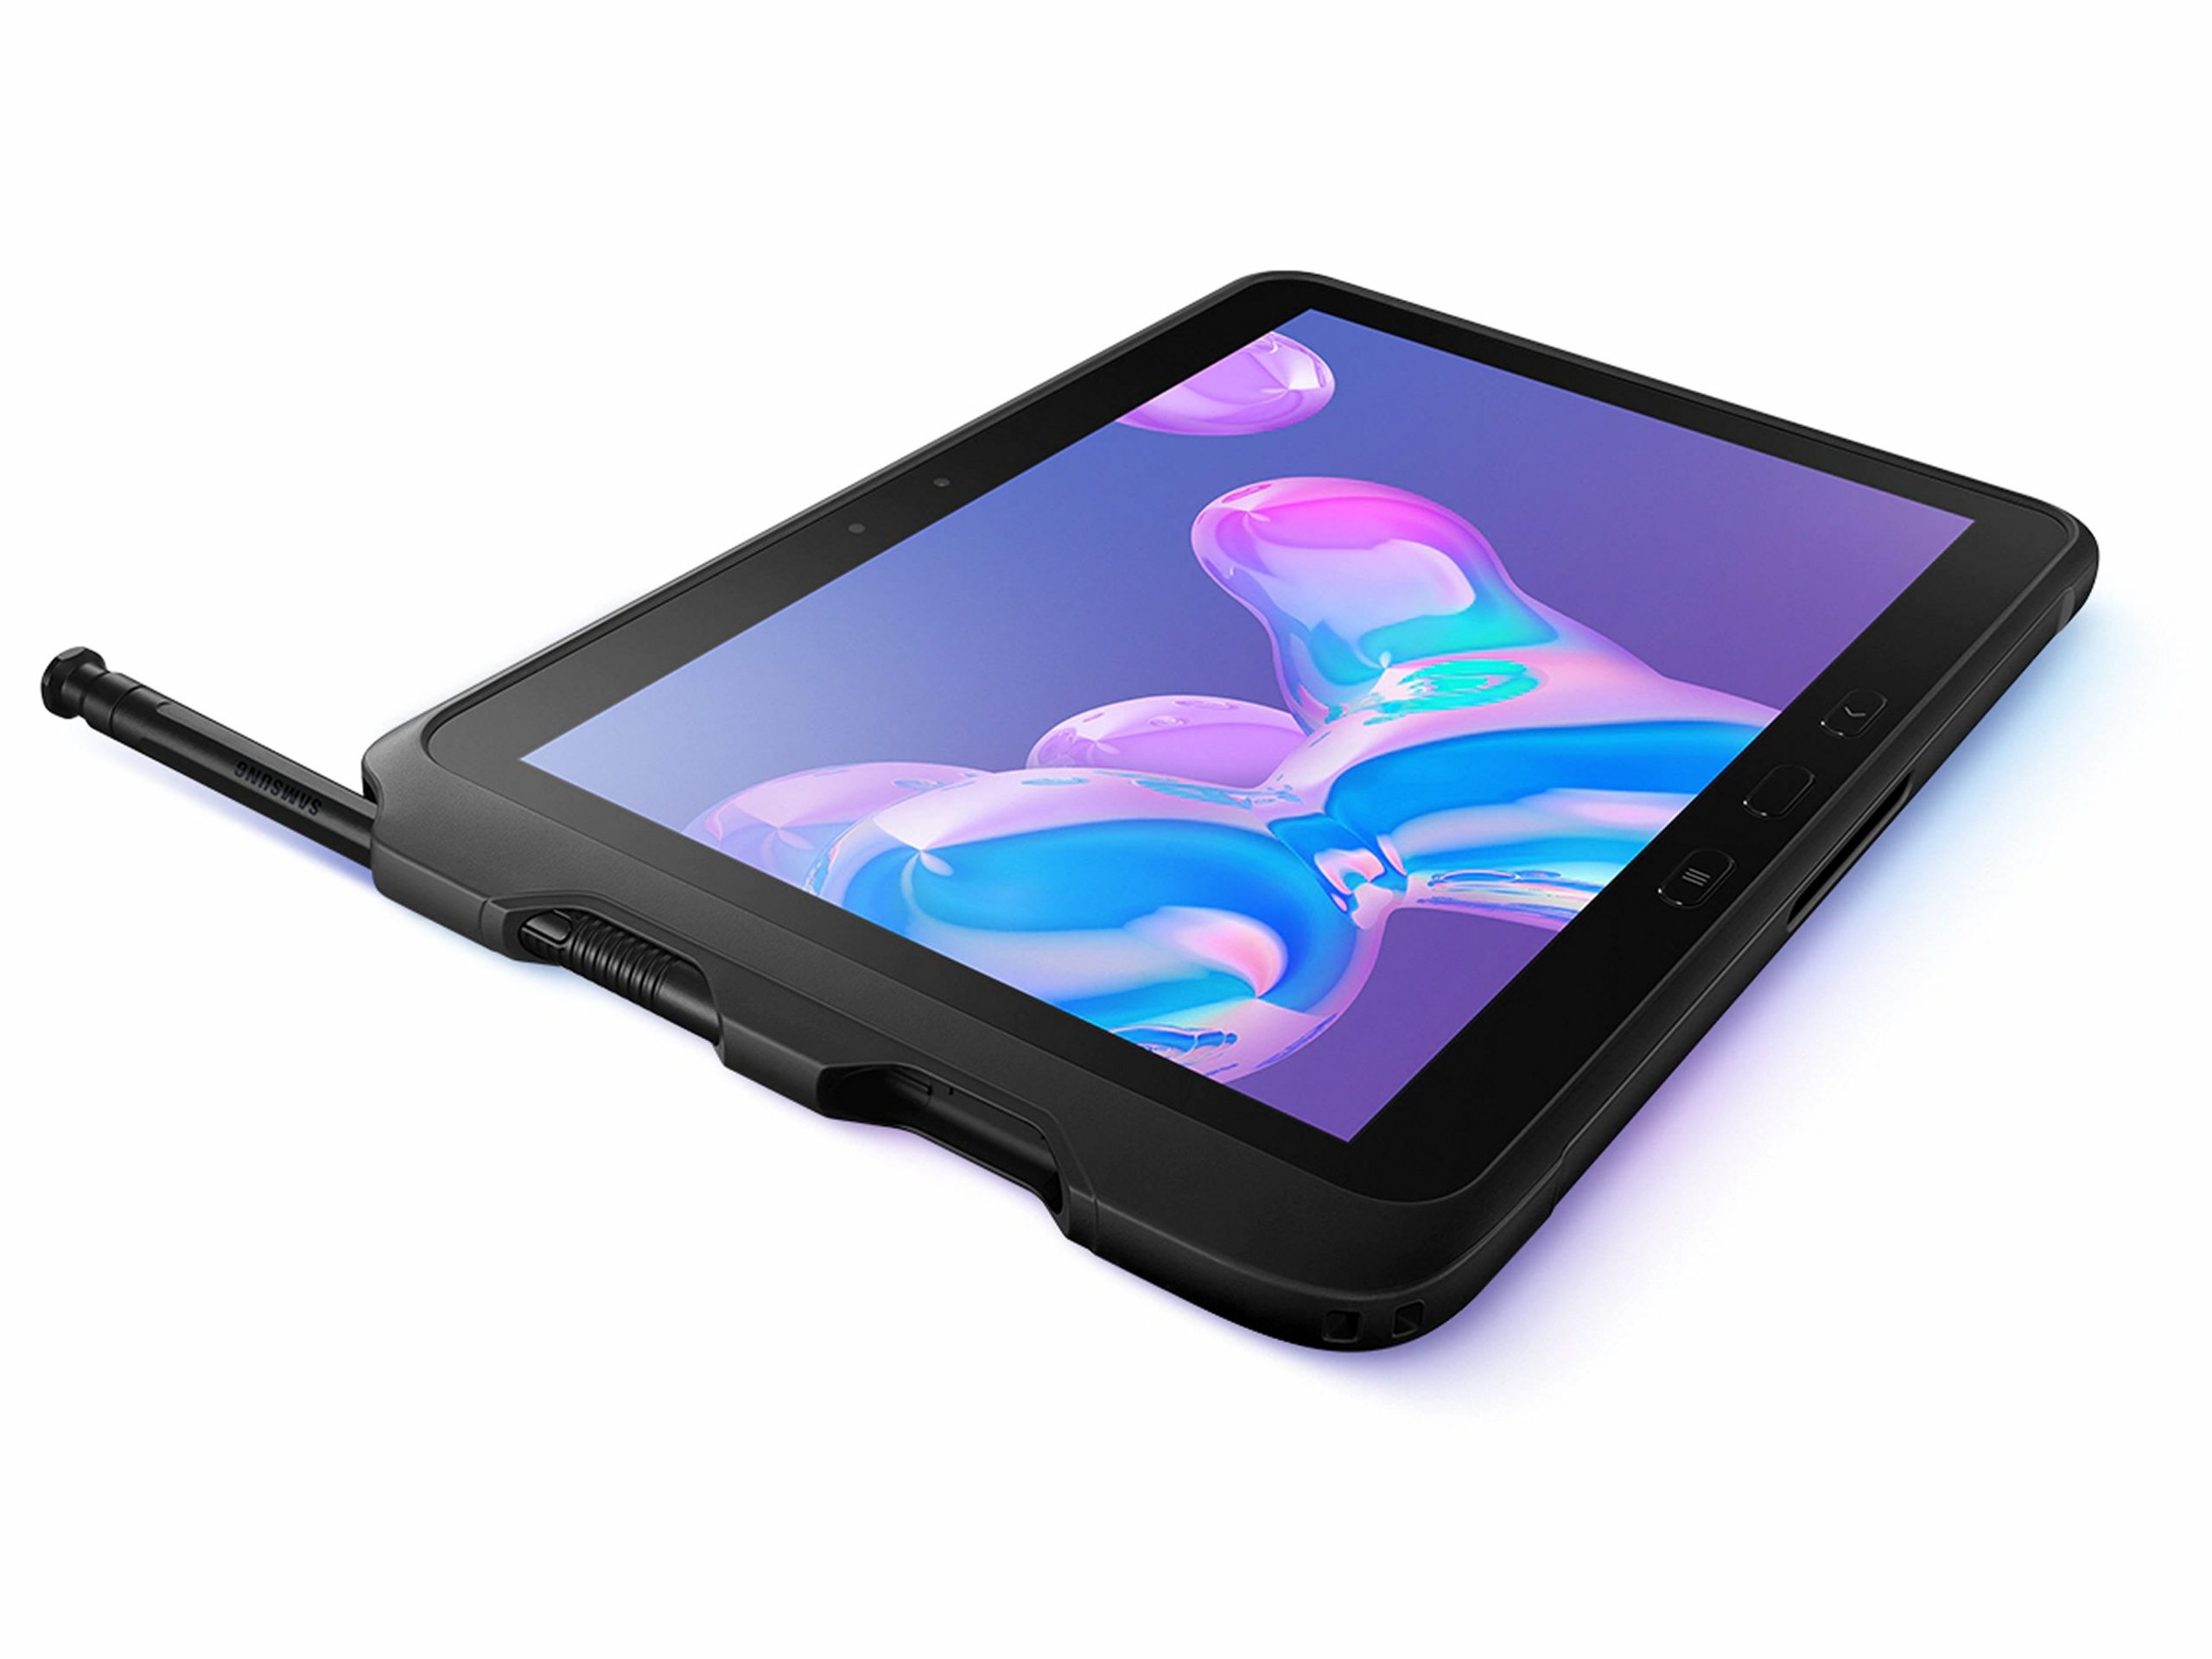 Best rugged tablets for construction in 2021 -Samsung Galaxy Tab Active Pro 